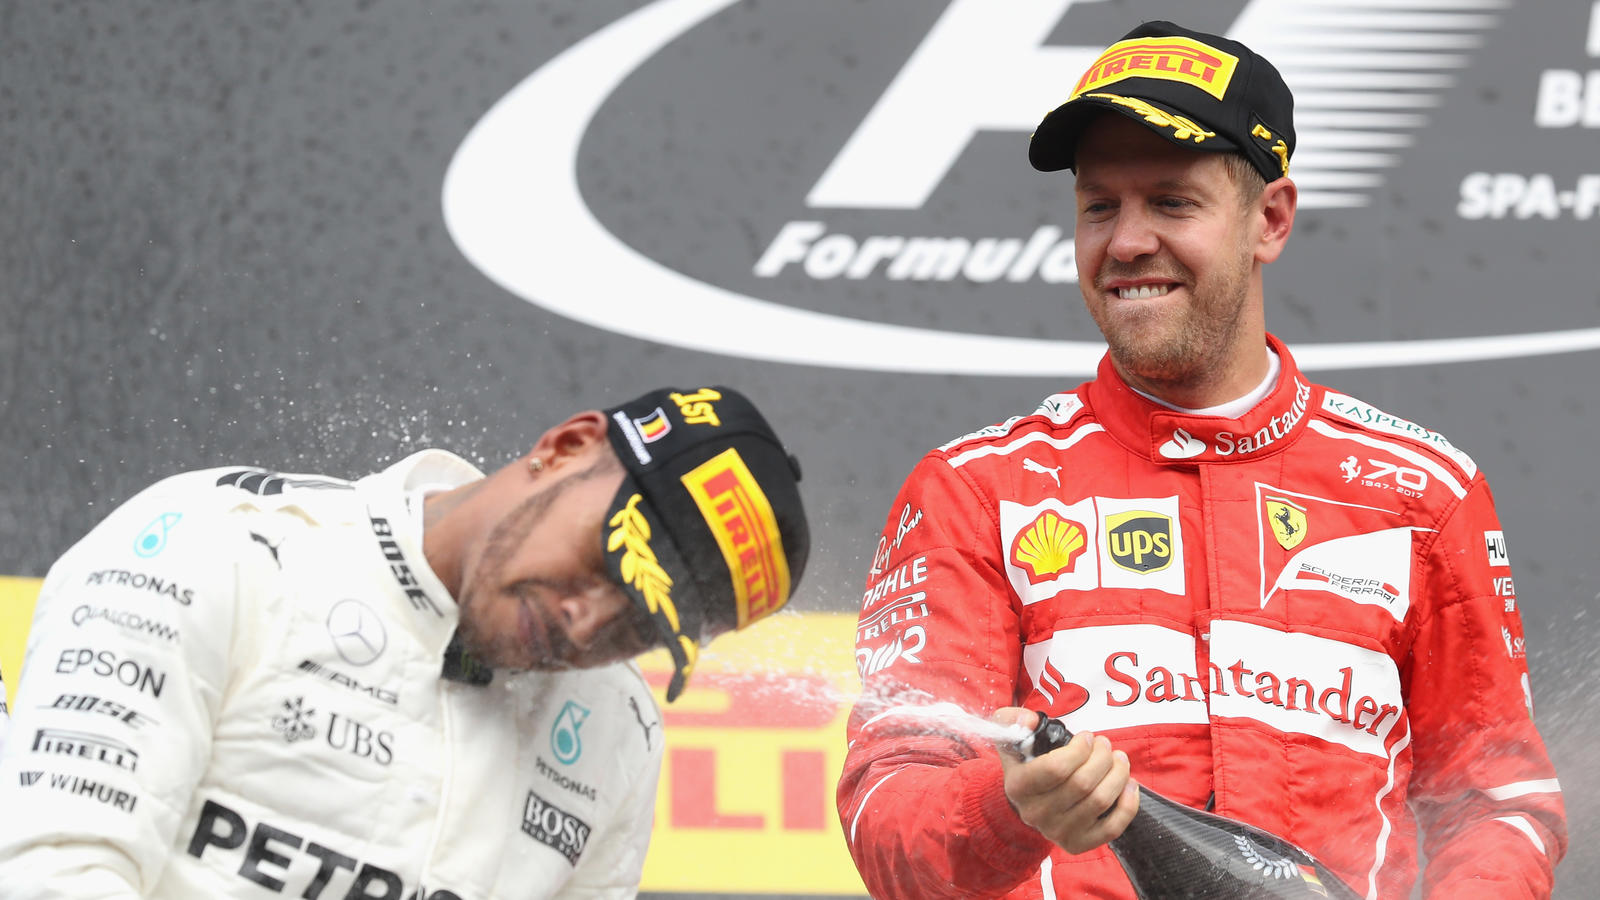 SPA, BELGIUM - AUGUST 27: Race winner Lewis Hamilton of Great Britain and Mercedes GP and second place Sebastian Vettel of Germany and Ferrari celebrate on the podium during the Formula One Grand Prix of Belgium at Circuit de Spa-Francorchamps on Aug